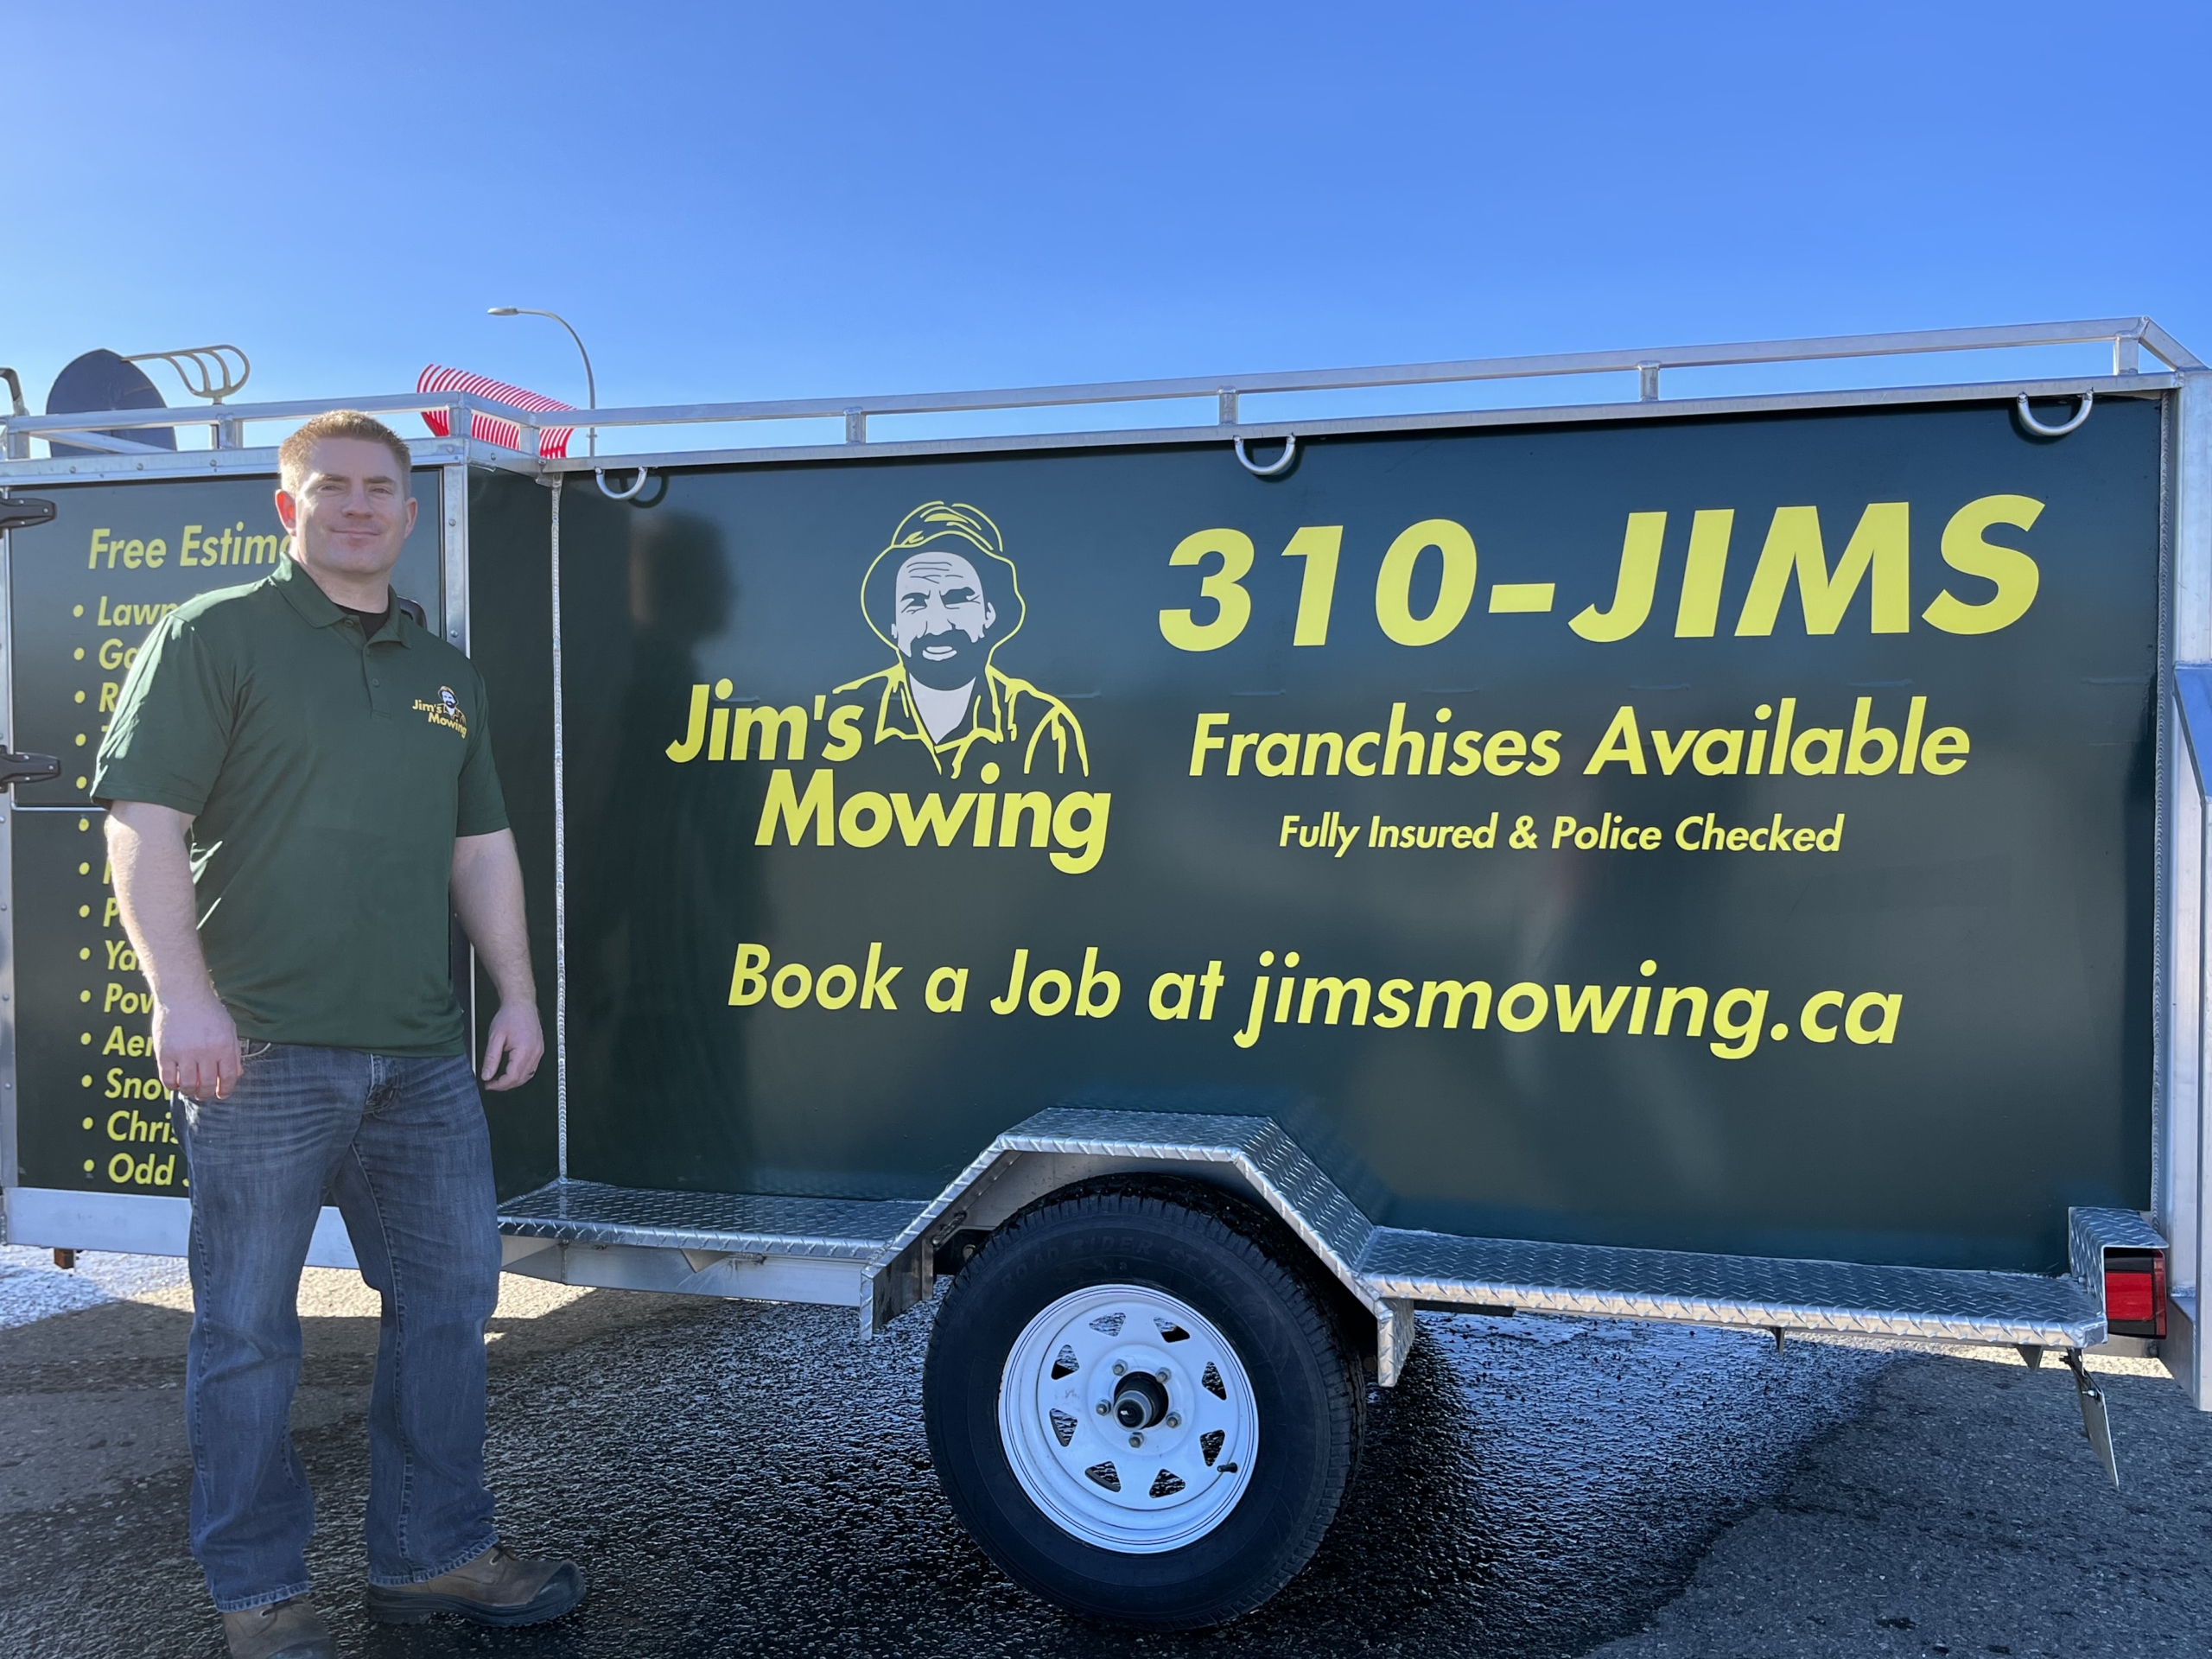 Jim’s Mowing Lawn Care Business Startup Kit in British Columbia